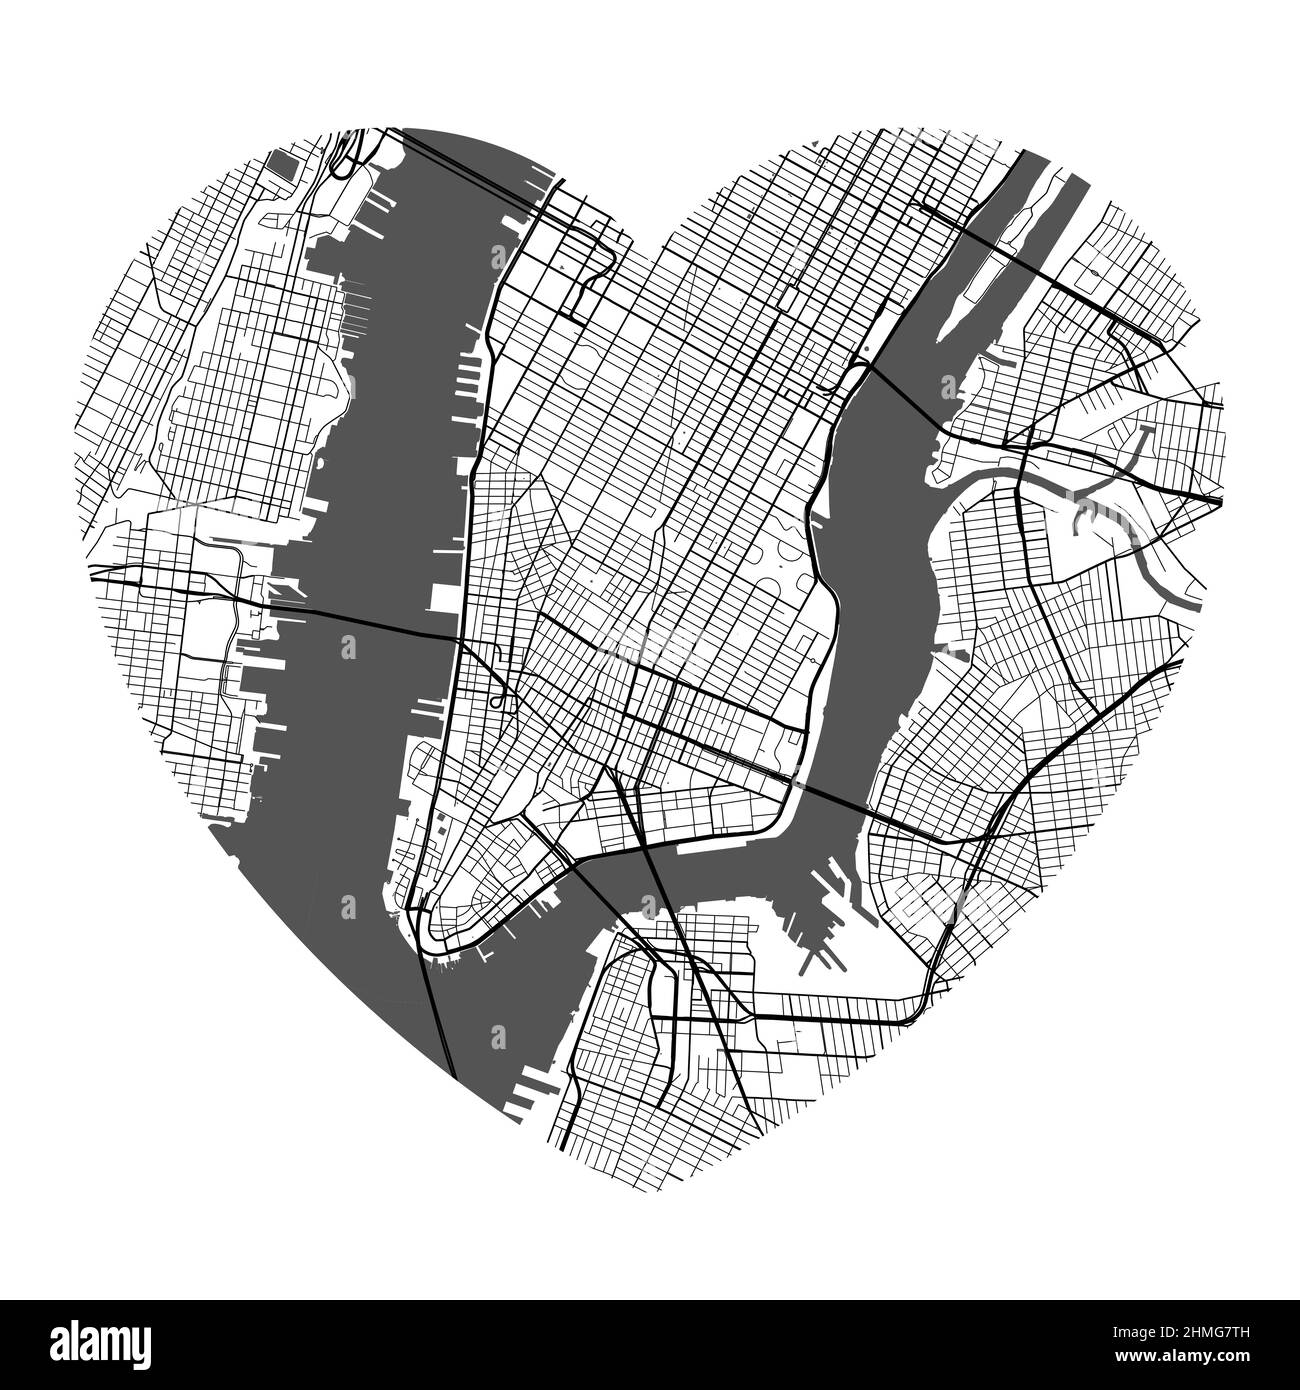 Heart shaped New York city vector map. Black and white colors illustration. Roads, streets, rivers. Stock Vector